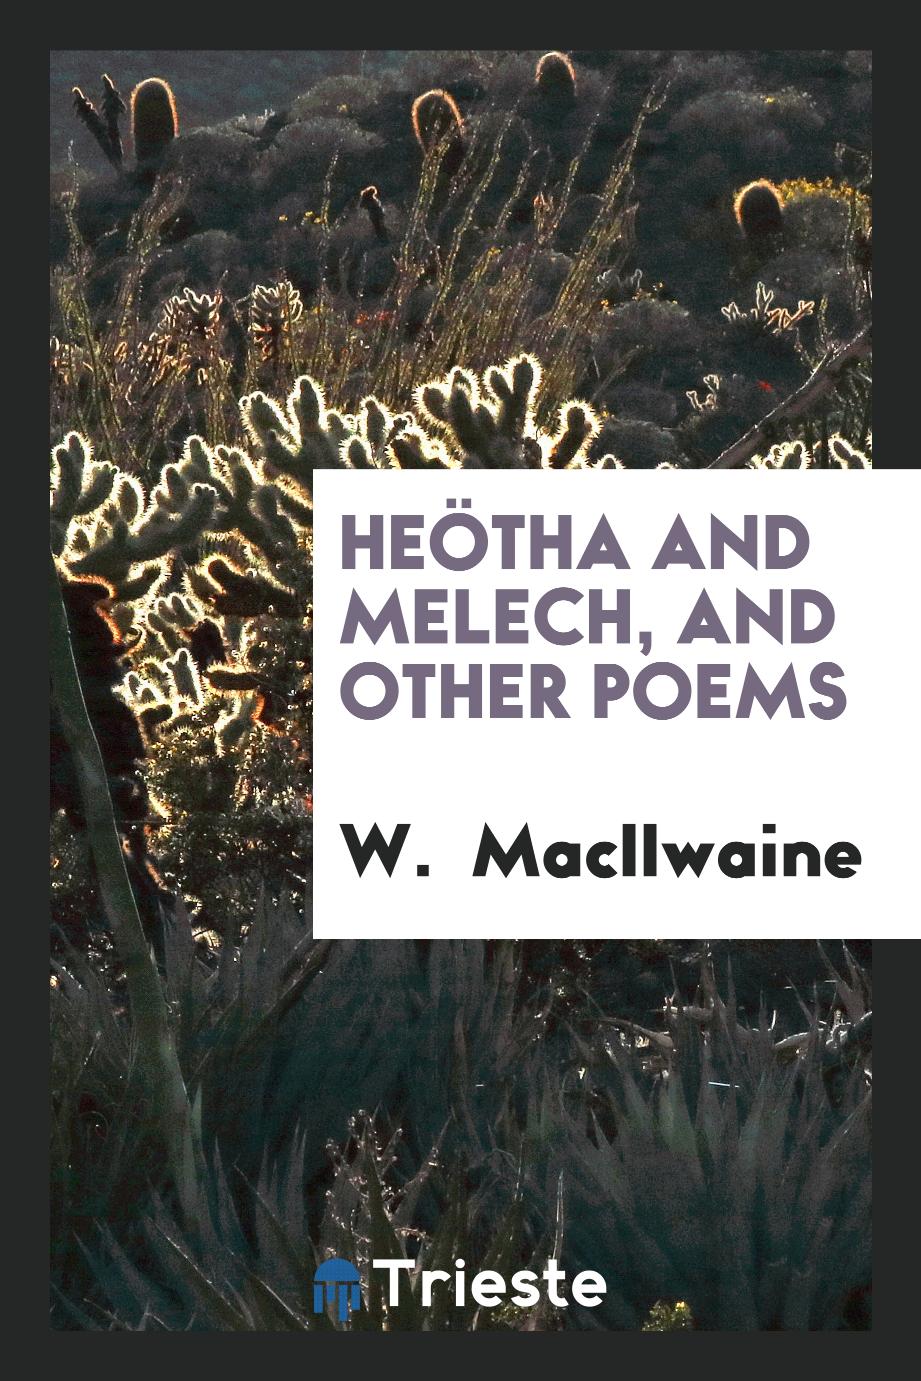 Heötha and Melech, and other poems